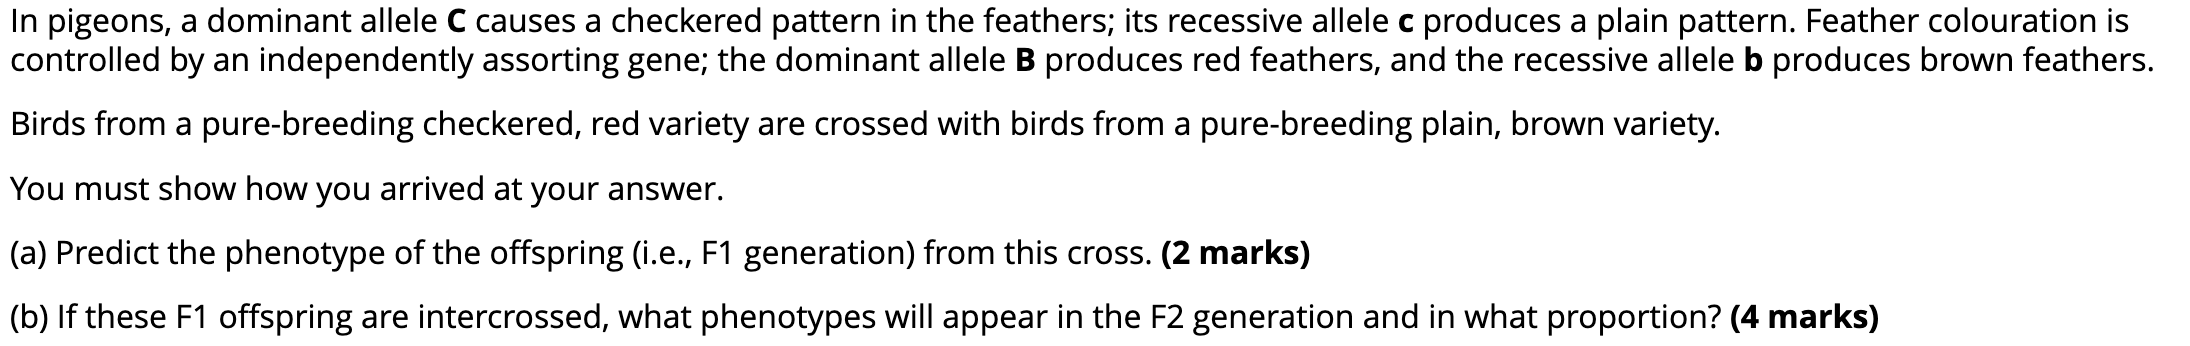 Solved In pigeons, a dominant allele C causes a checkered | Chegg.com